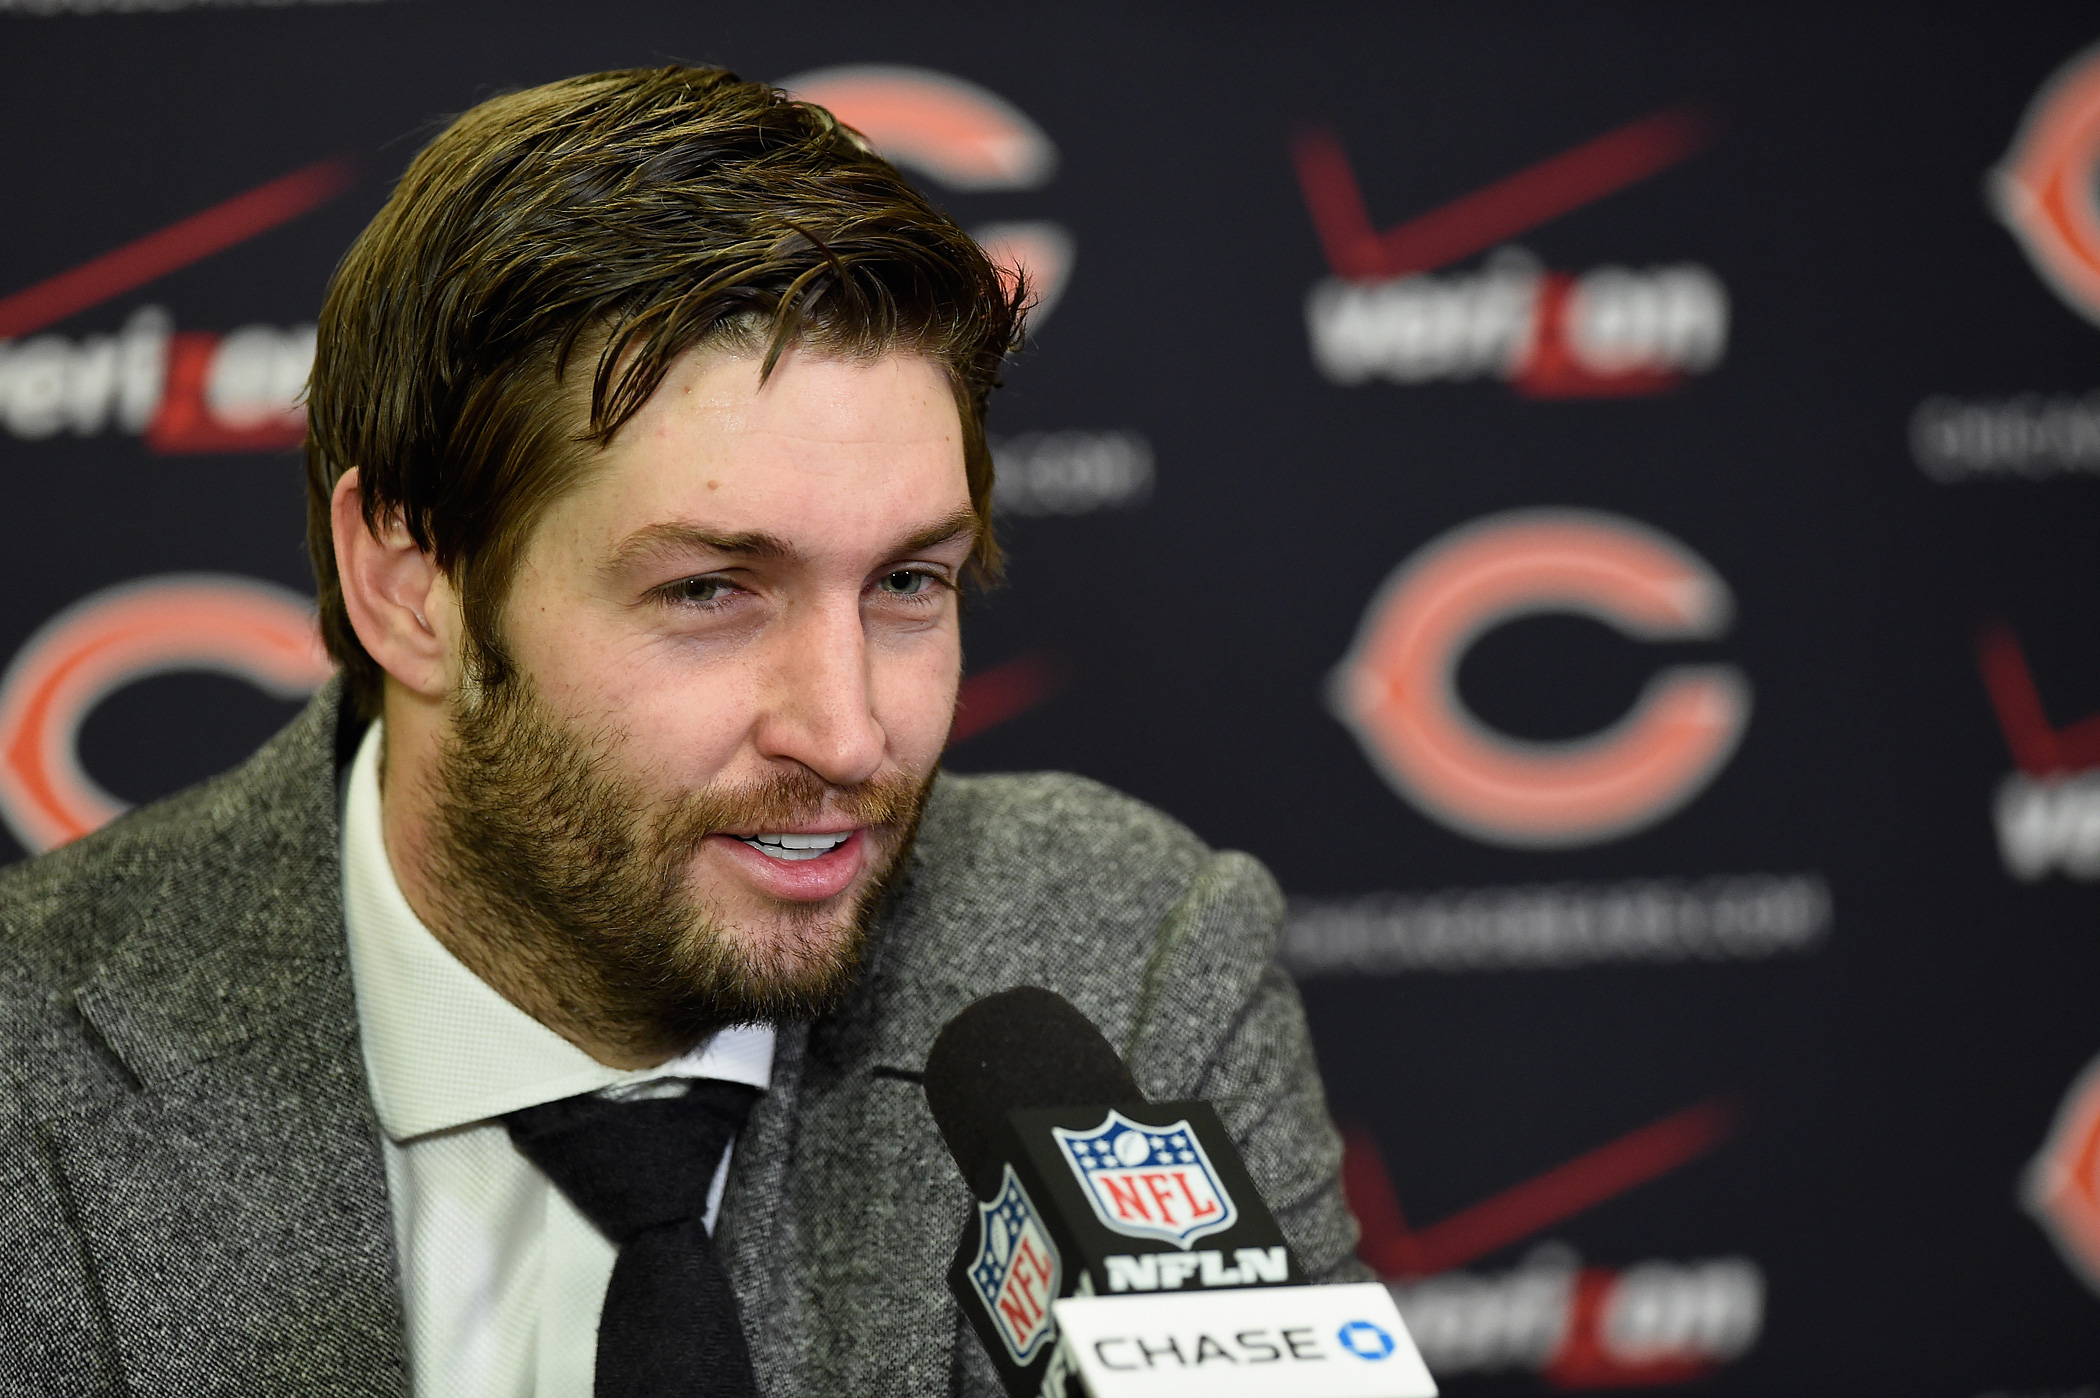 Jay Cutler of the Chicago Bears speaks to the media after the game against the Minnesota Vikings on Dec.28, 2014 at TCF Bank Stadium in Minneapolis, MN. (Hannah Foslien&mdash;Getty Images)